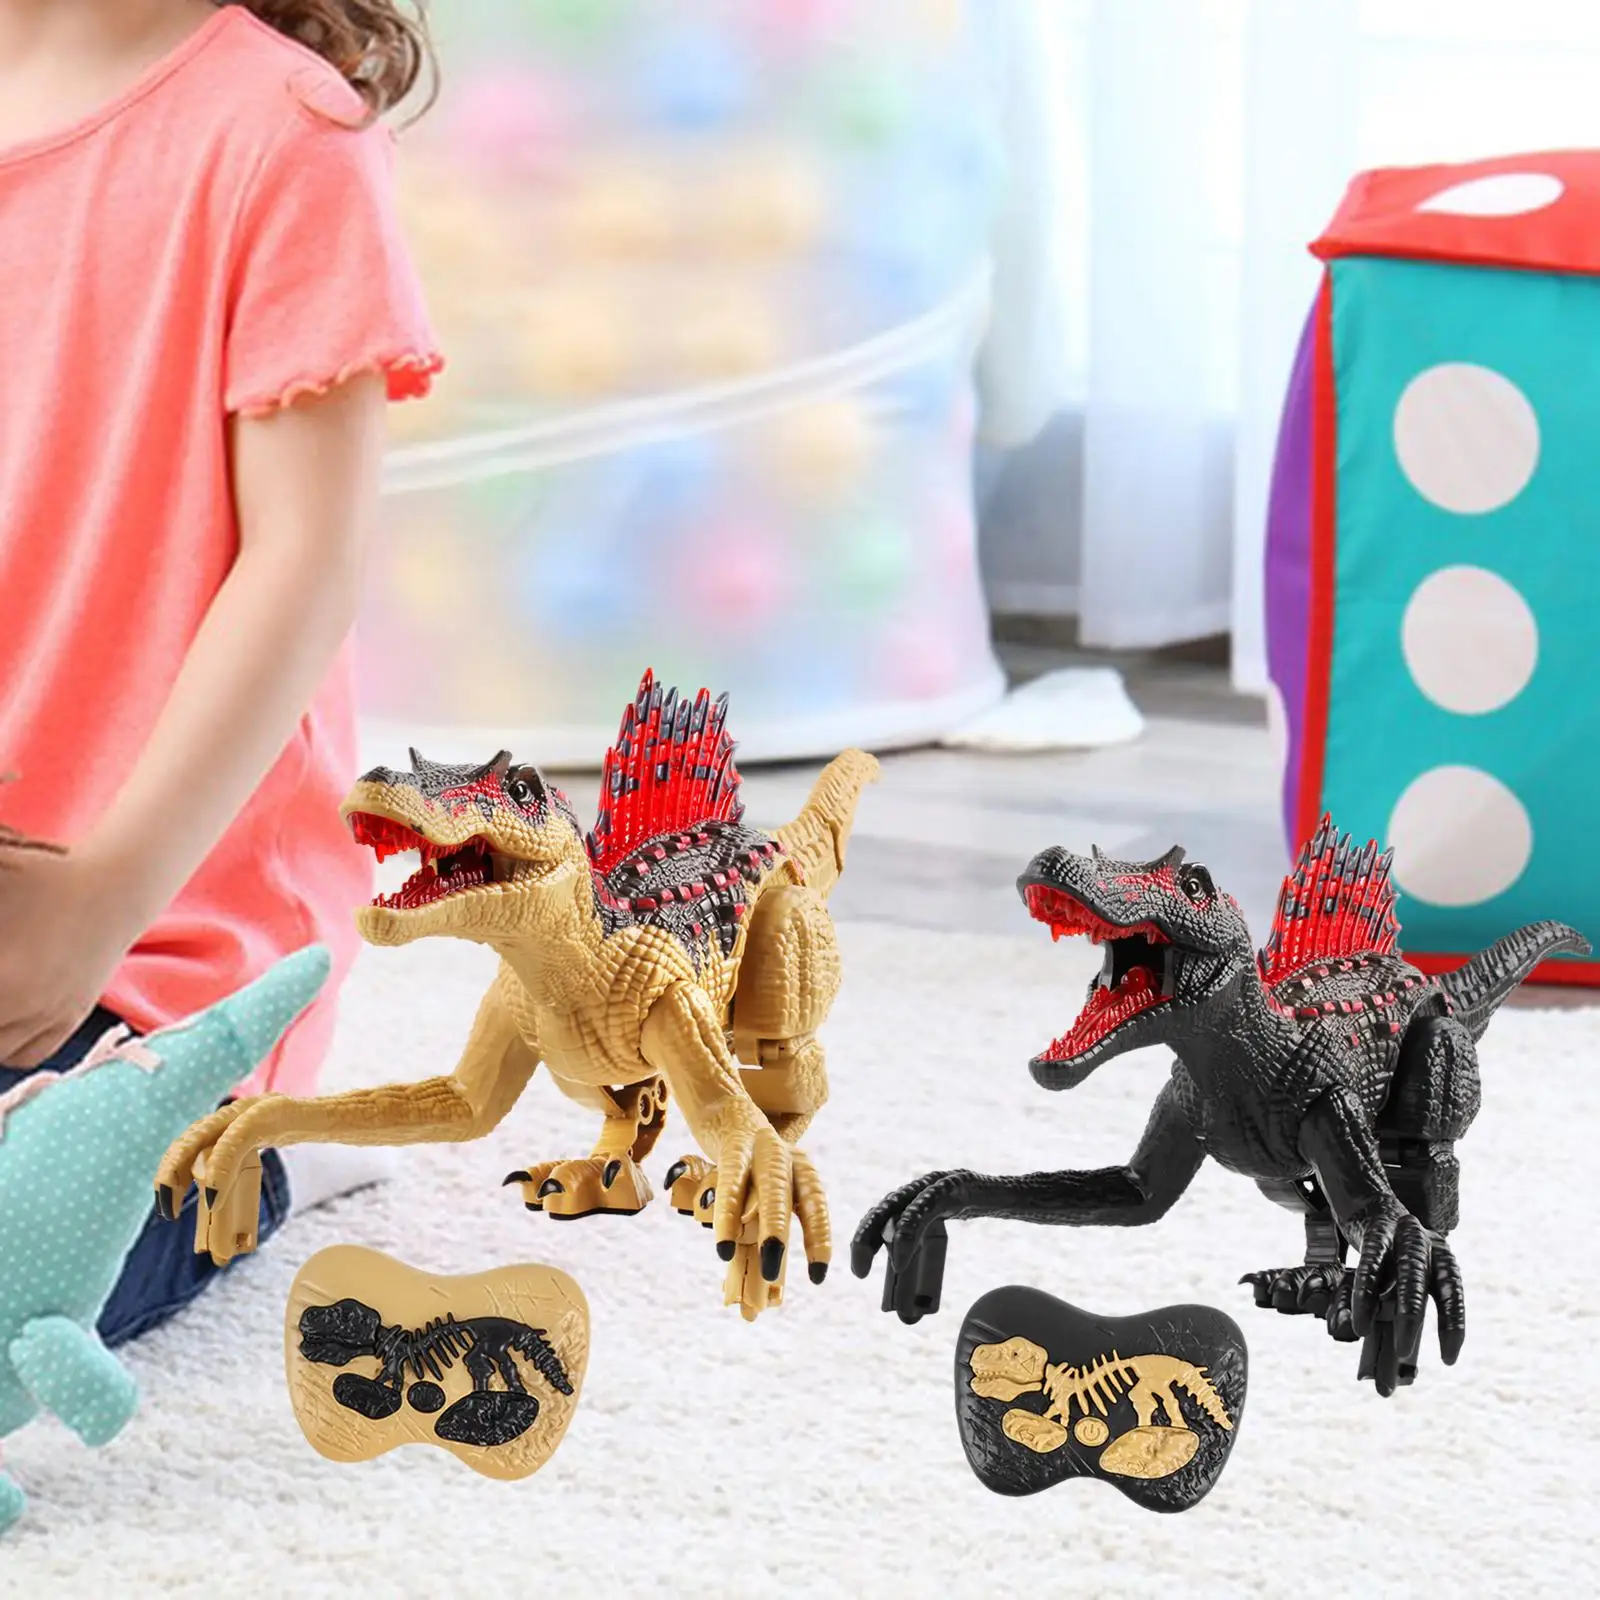 Remote Control Car Dinosaur Toy Moveable Limbs, Opened Jaw, Luminous Back Educational Toy Electronic RC Dinosaur for Party Favor